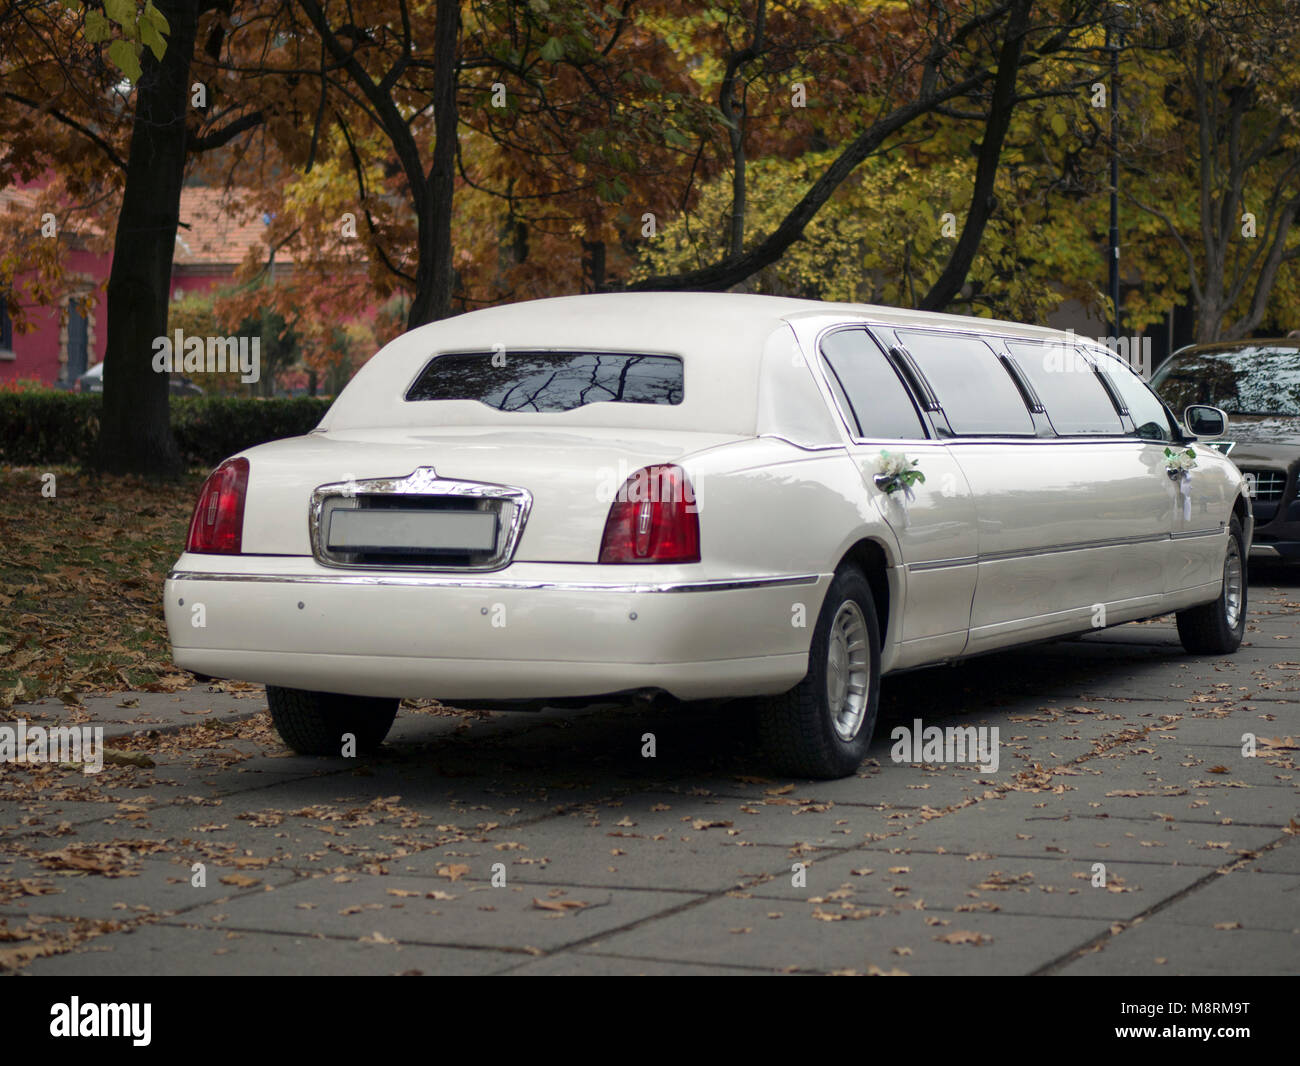 White wedding limousine with flowers on door in the autumn park Stock Photo